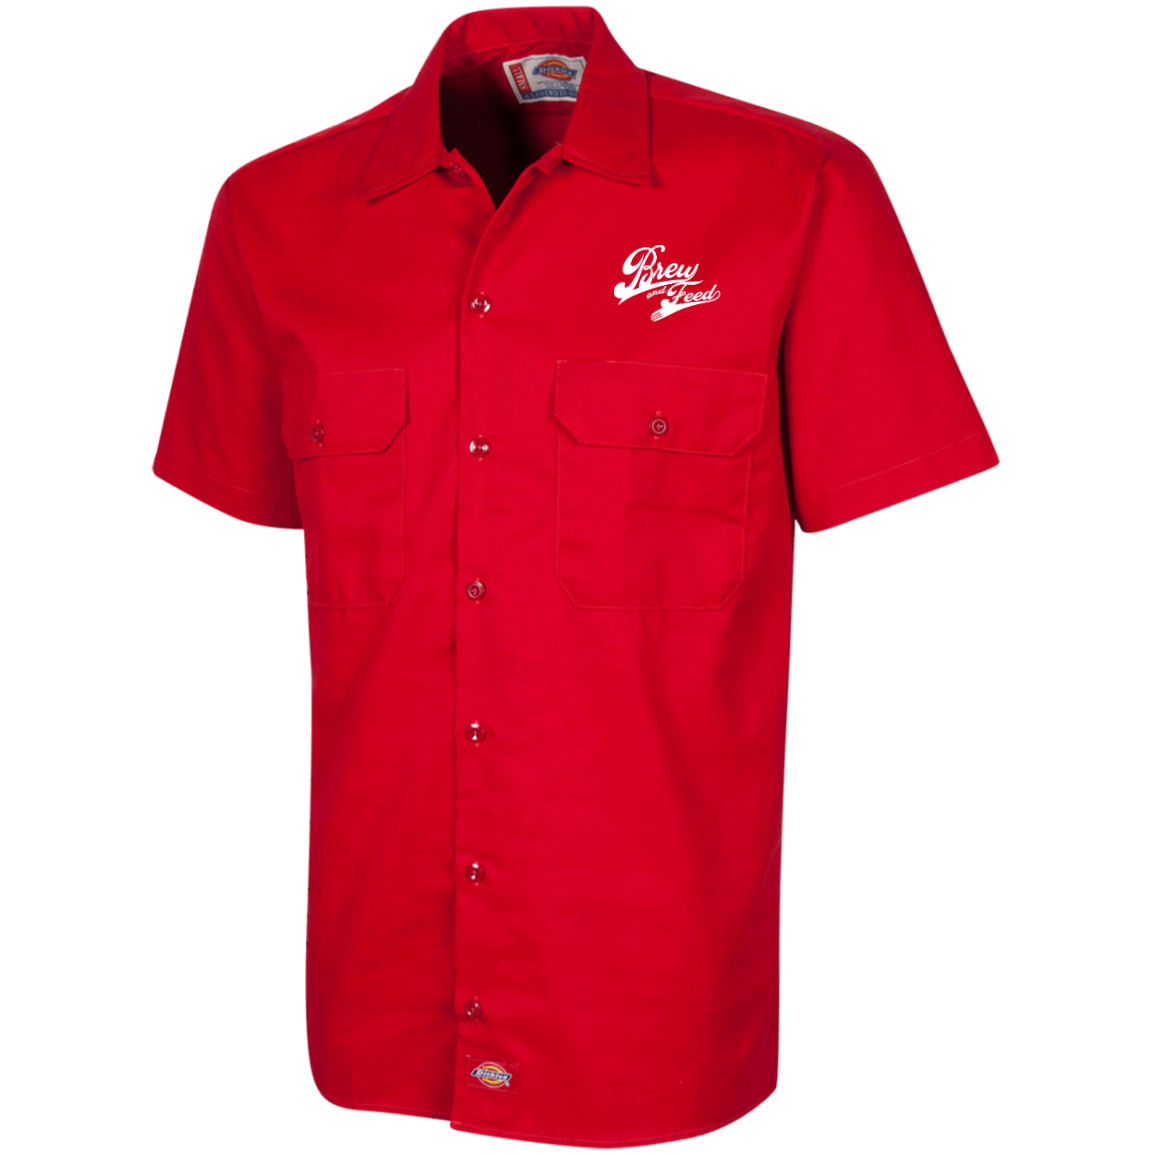 Brew and Feed Brewhouse Work Shirt - Red / S - Red / M - Red / L - Red / XL - Red / 2XL - Red / 3XL